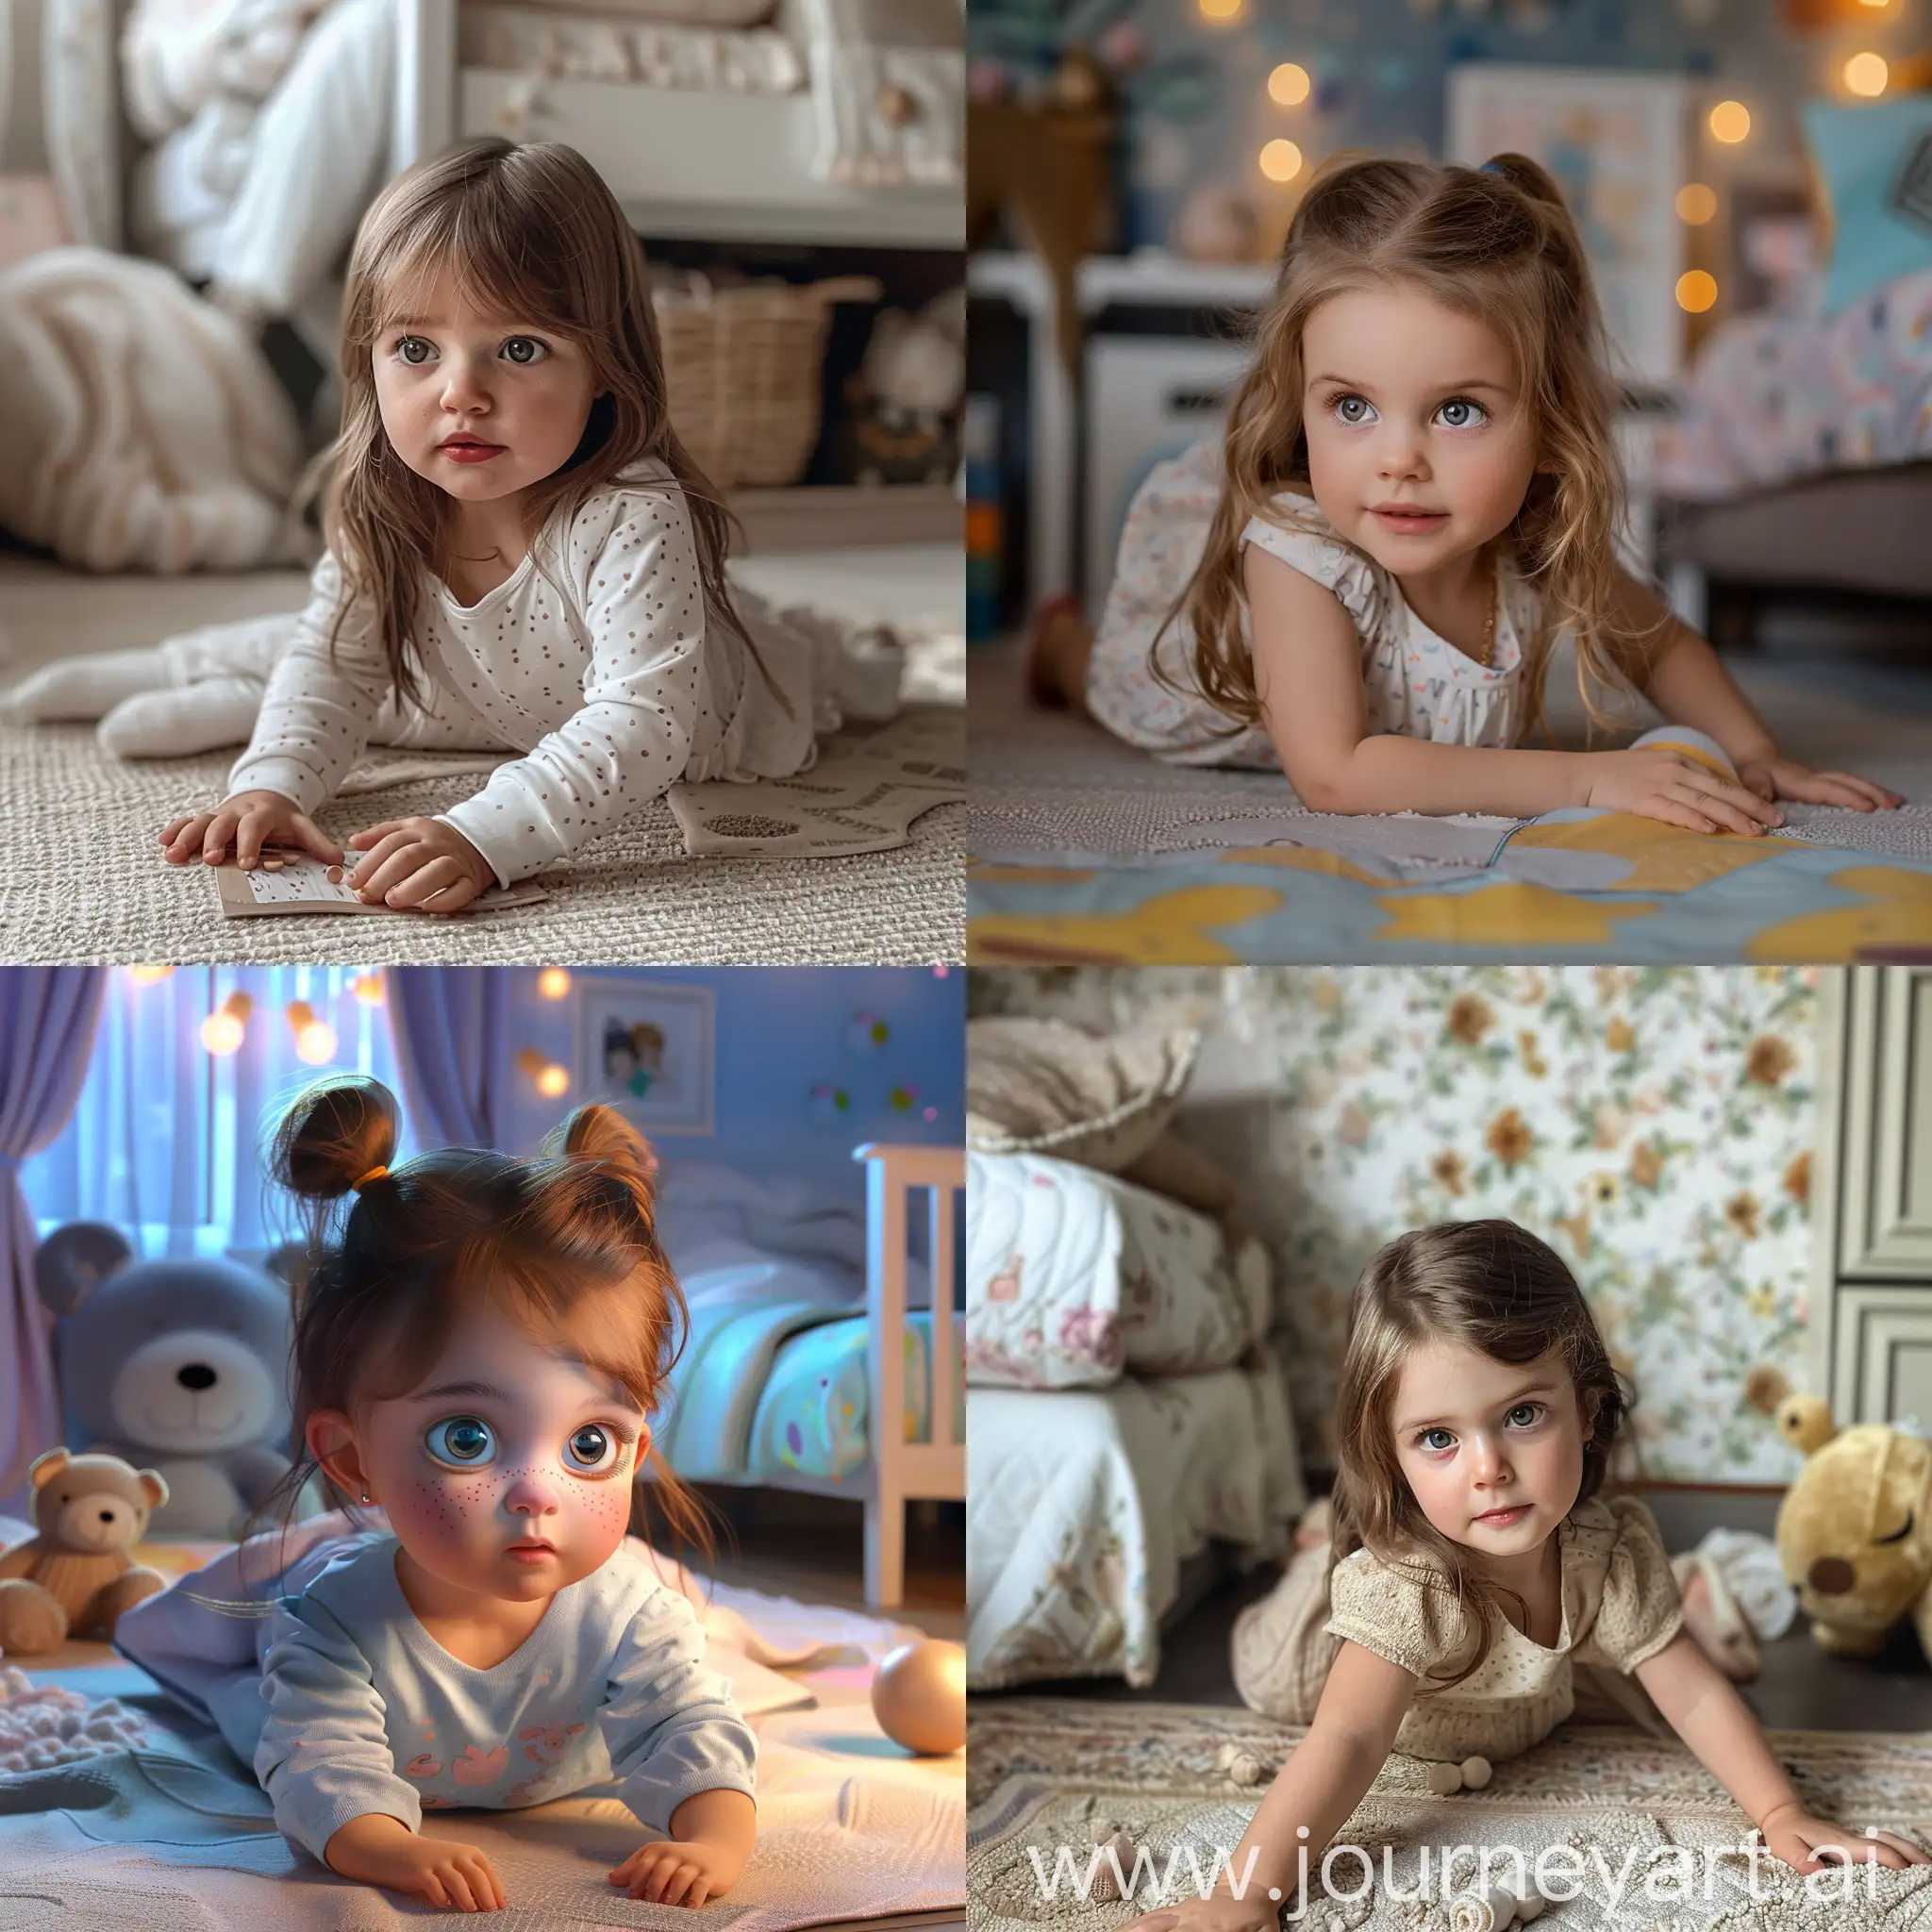 Candid-Moments-Little-Girl-Playing-in-a-Sunlit-Bedroom